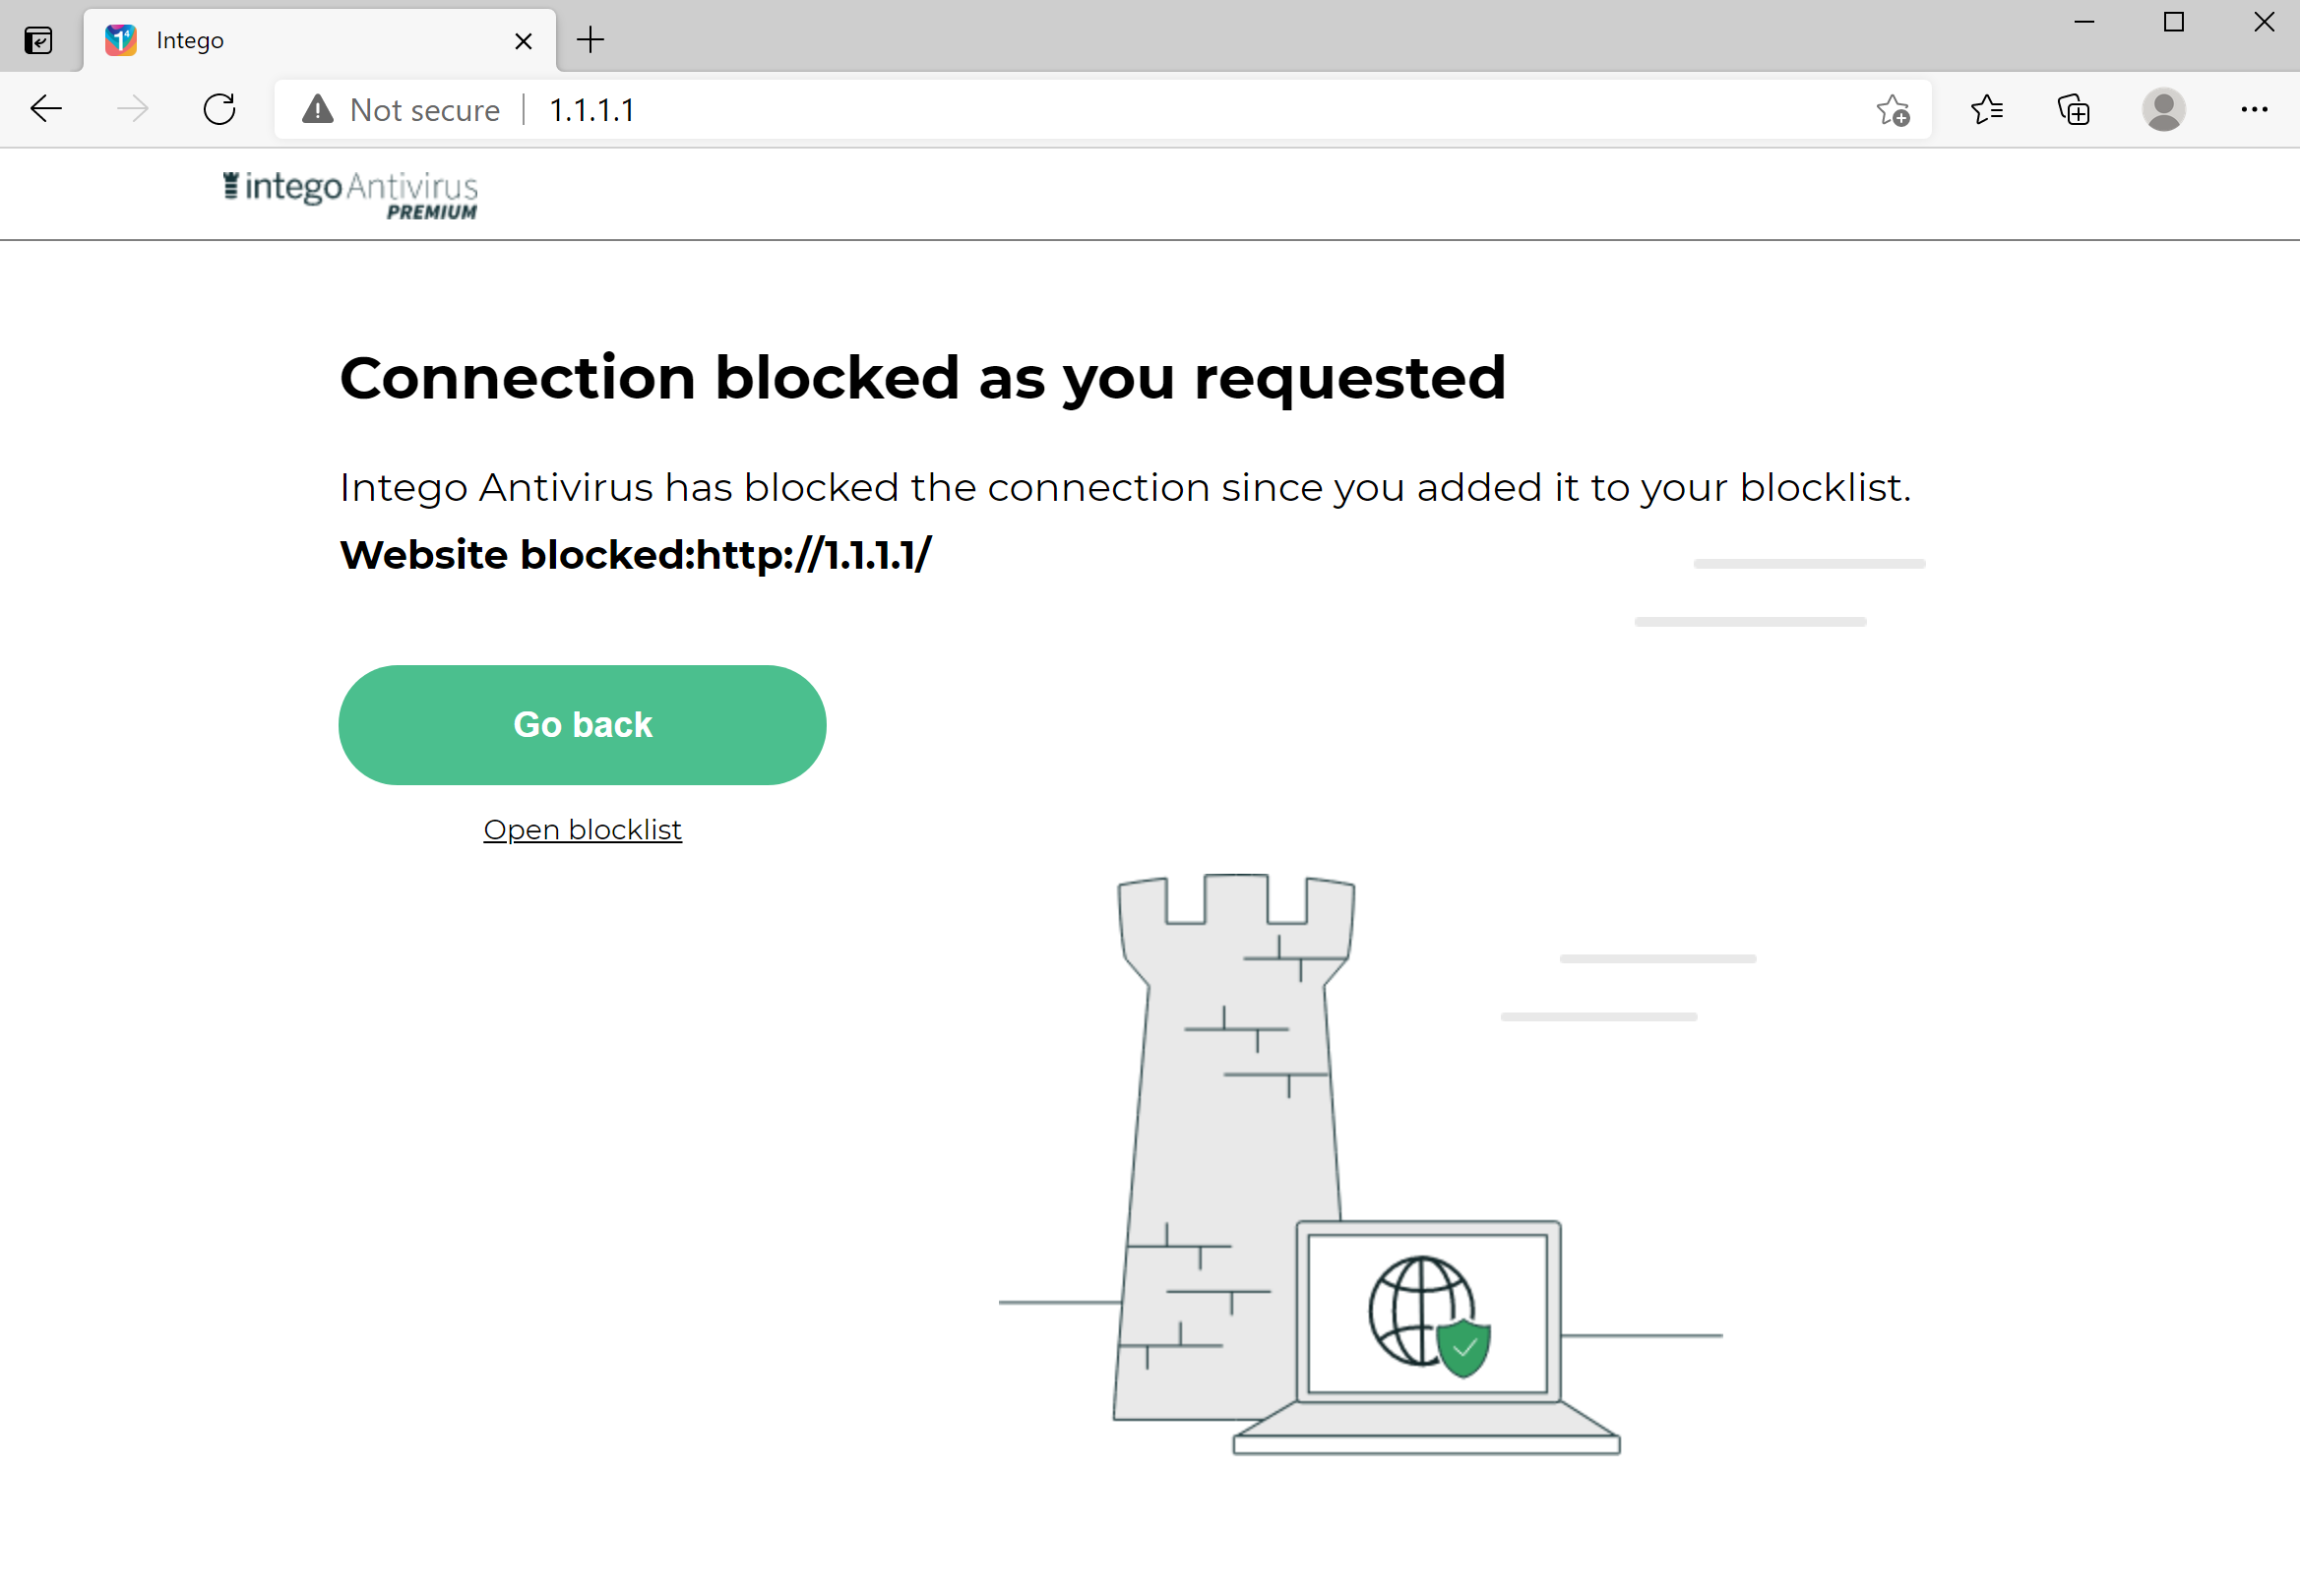 IAV-ConnectionBlocked.png